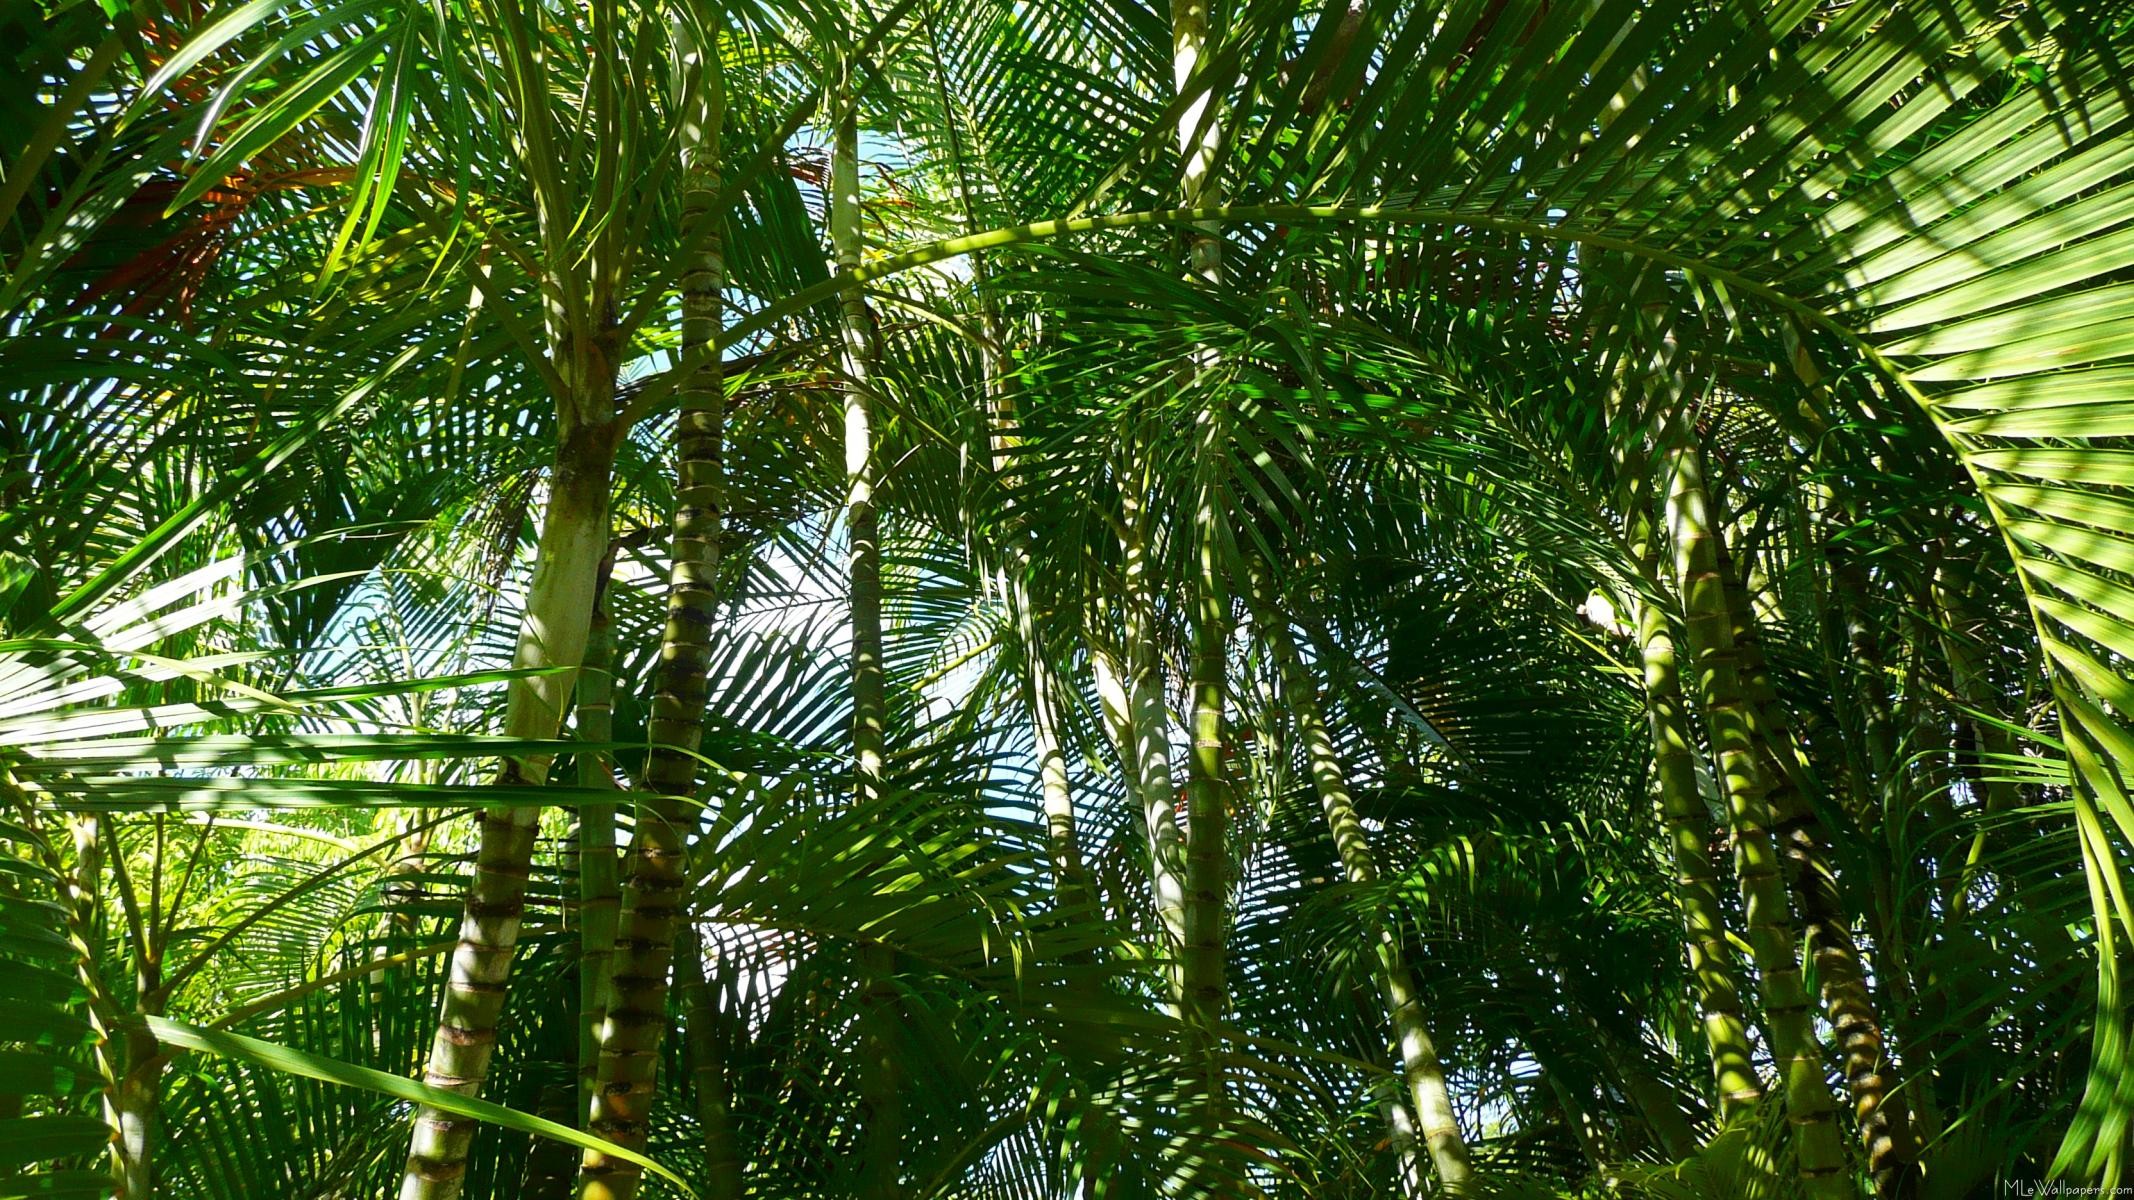 2134x1200 There are several wallpapers of a single lovely palm tree on this website.  Here's a whole forest of young palm trees in a wallpaper. Forest of Palm  Trees